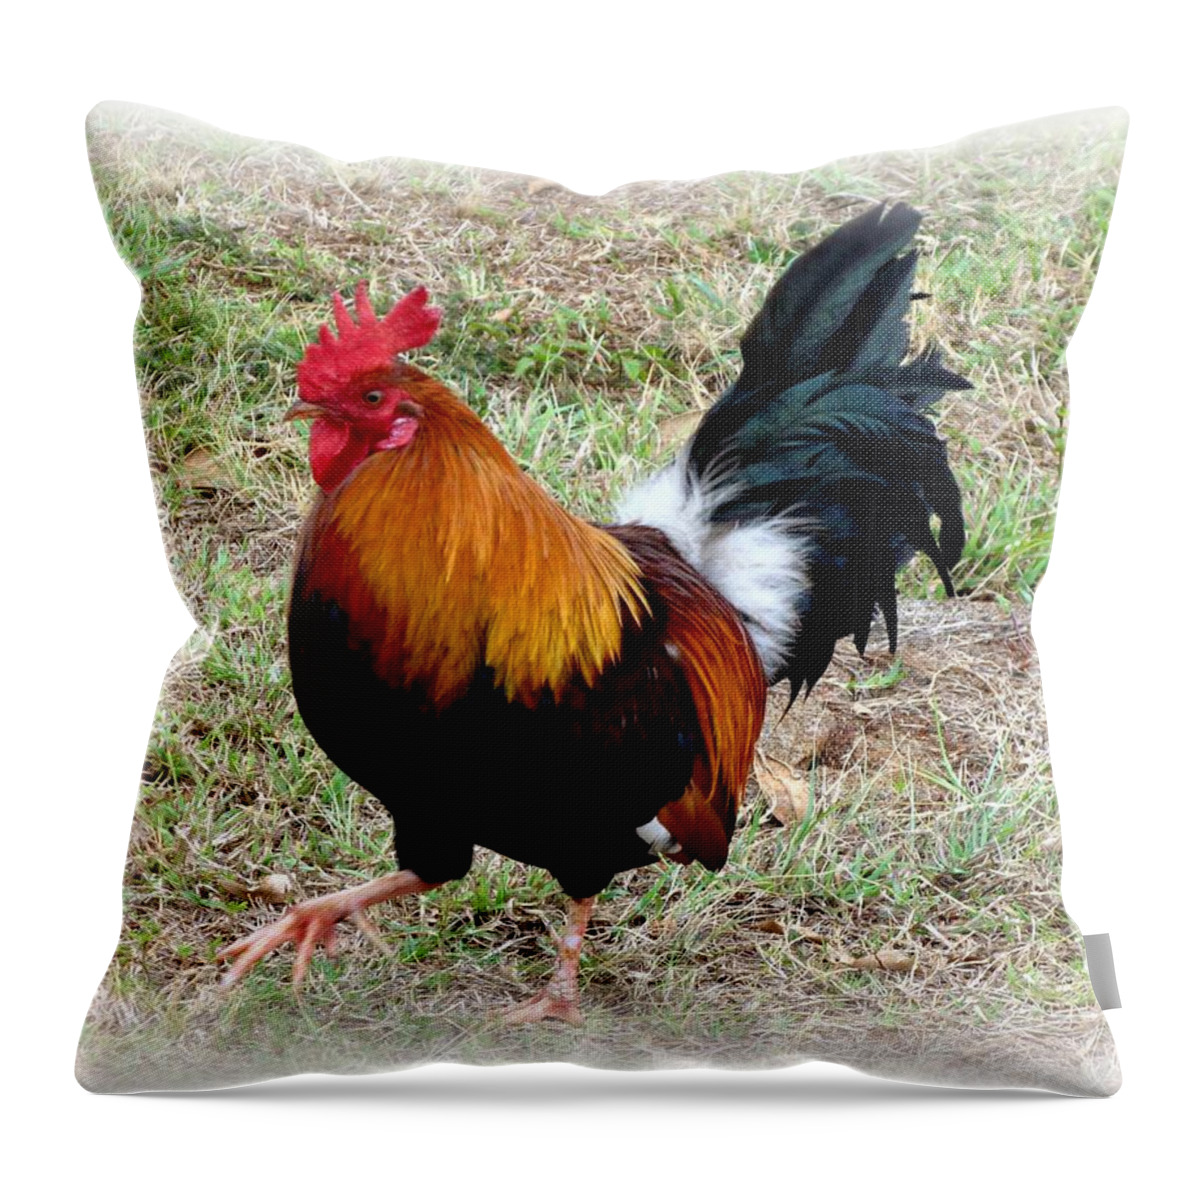 Rooster Throw Pillow featuring the photograph Kauai Rooster by Carol Sweetwood